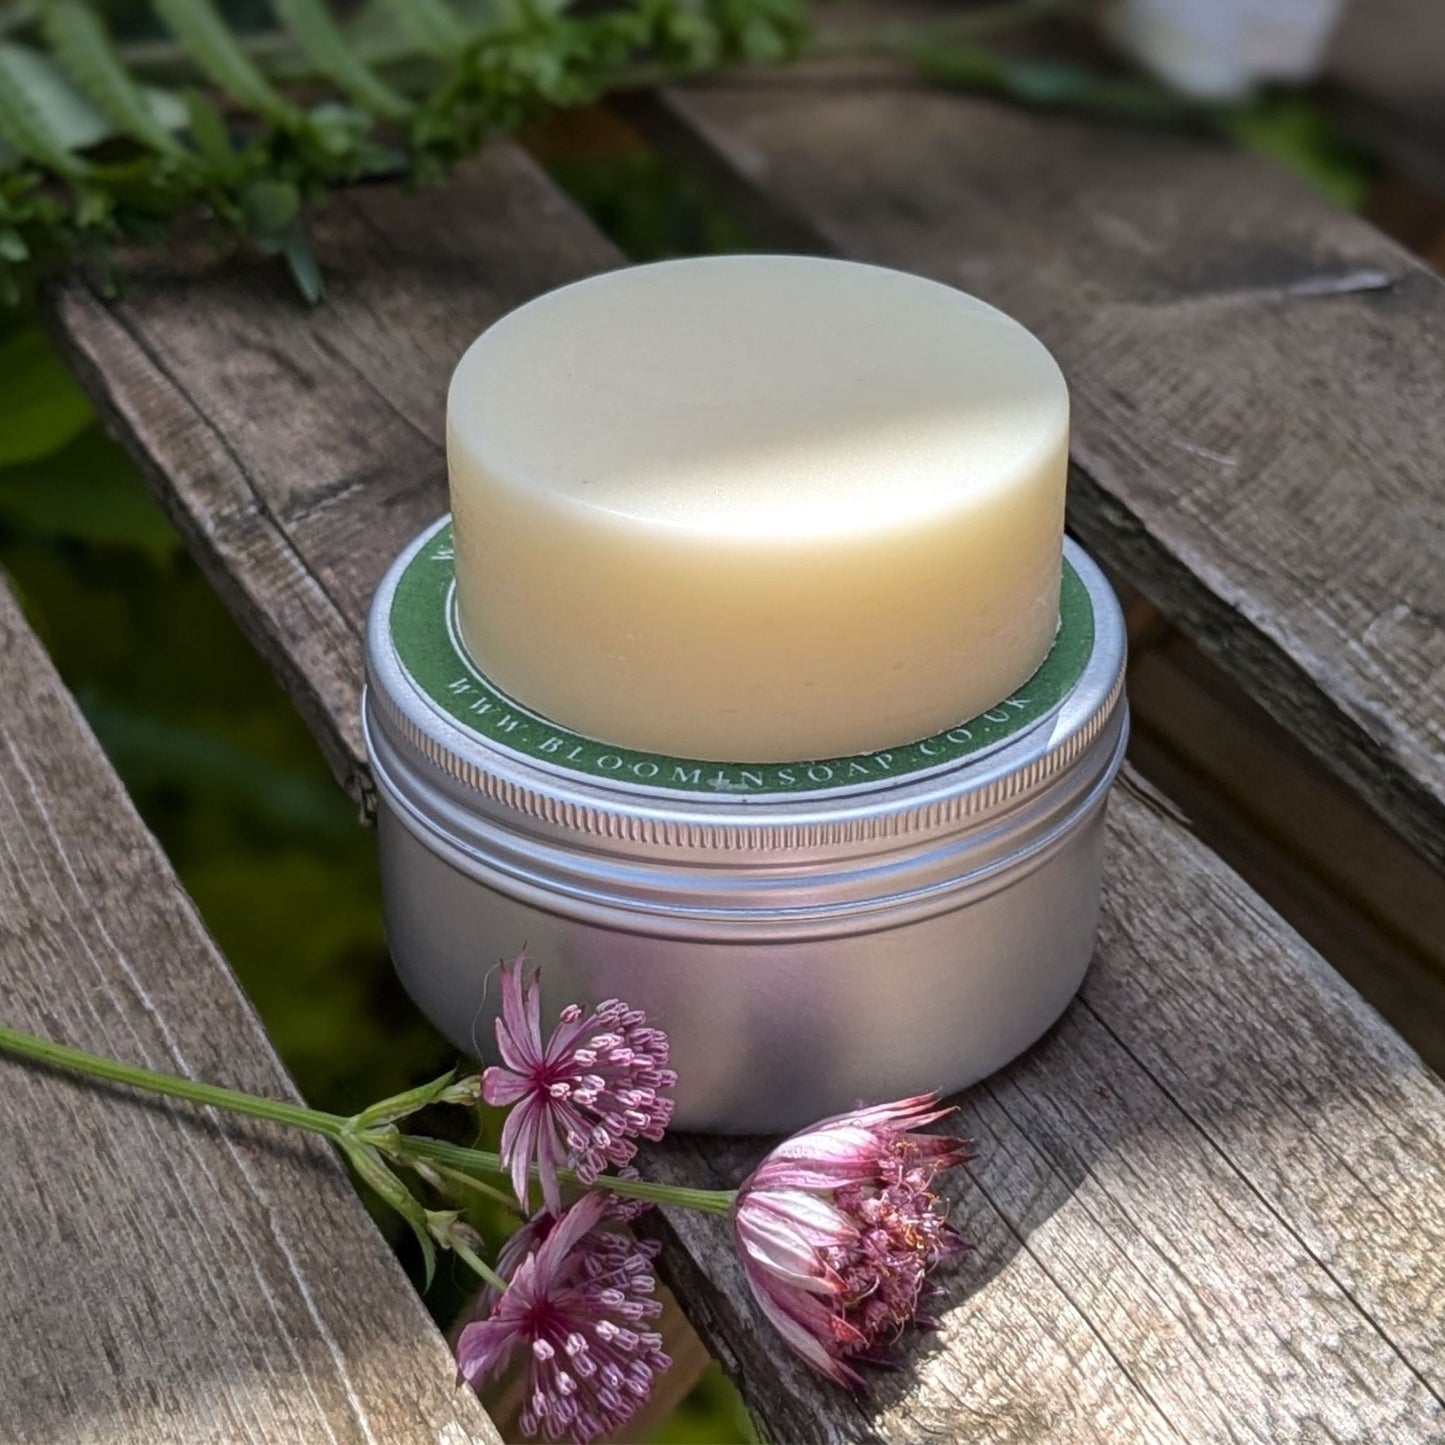 Herbal Boost conditioner bars in a tin from Bloom In Soap